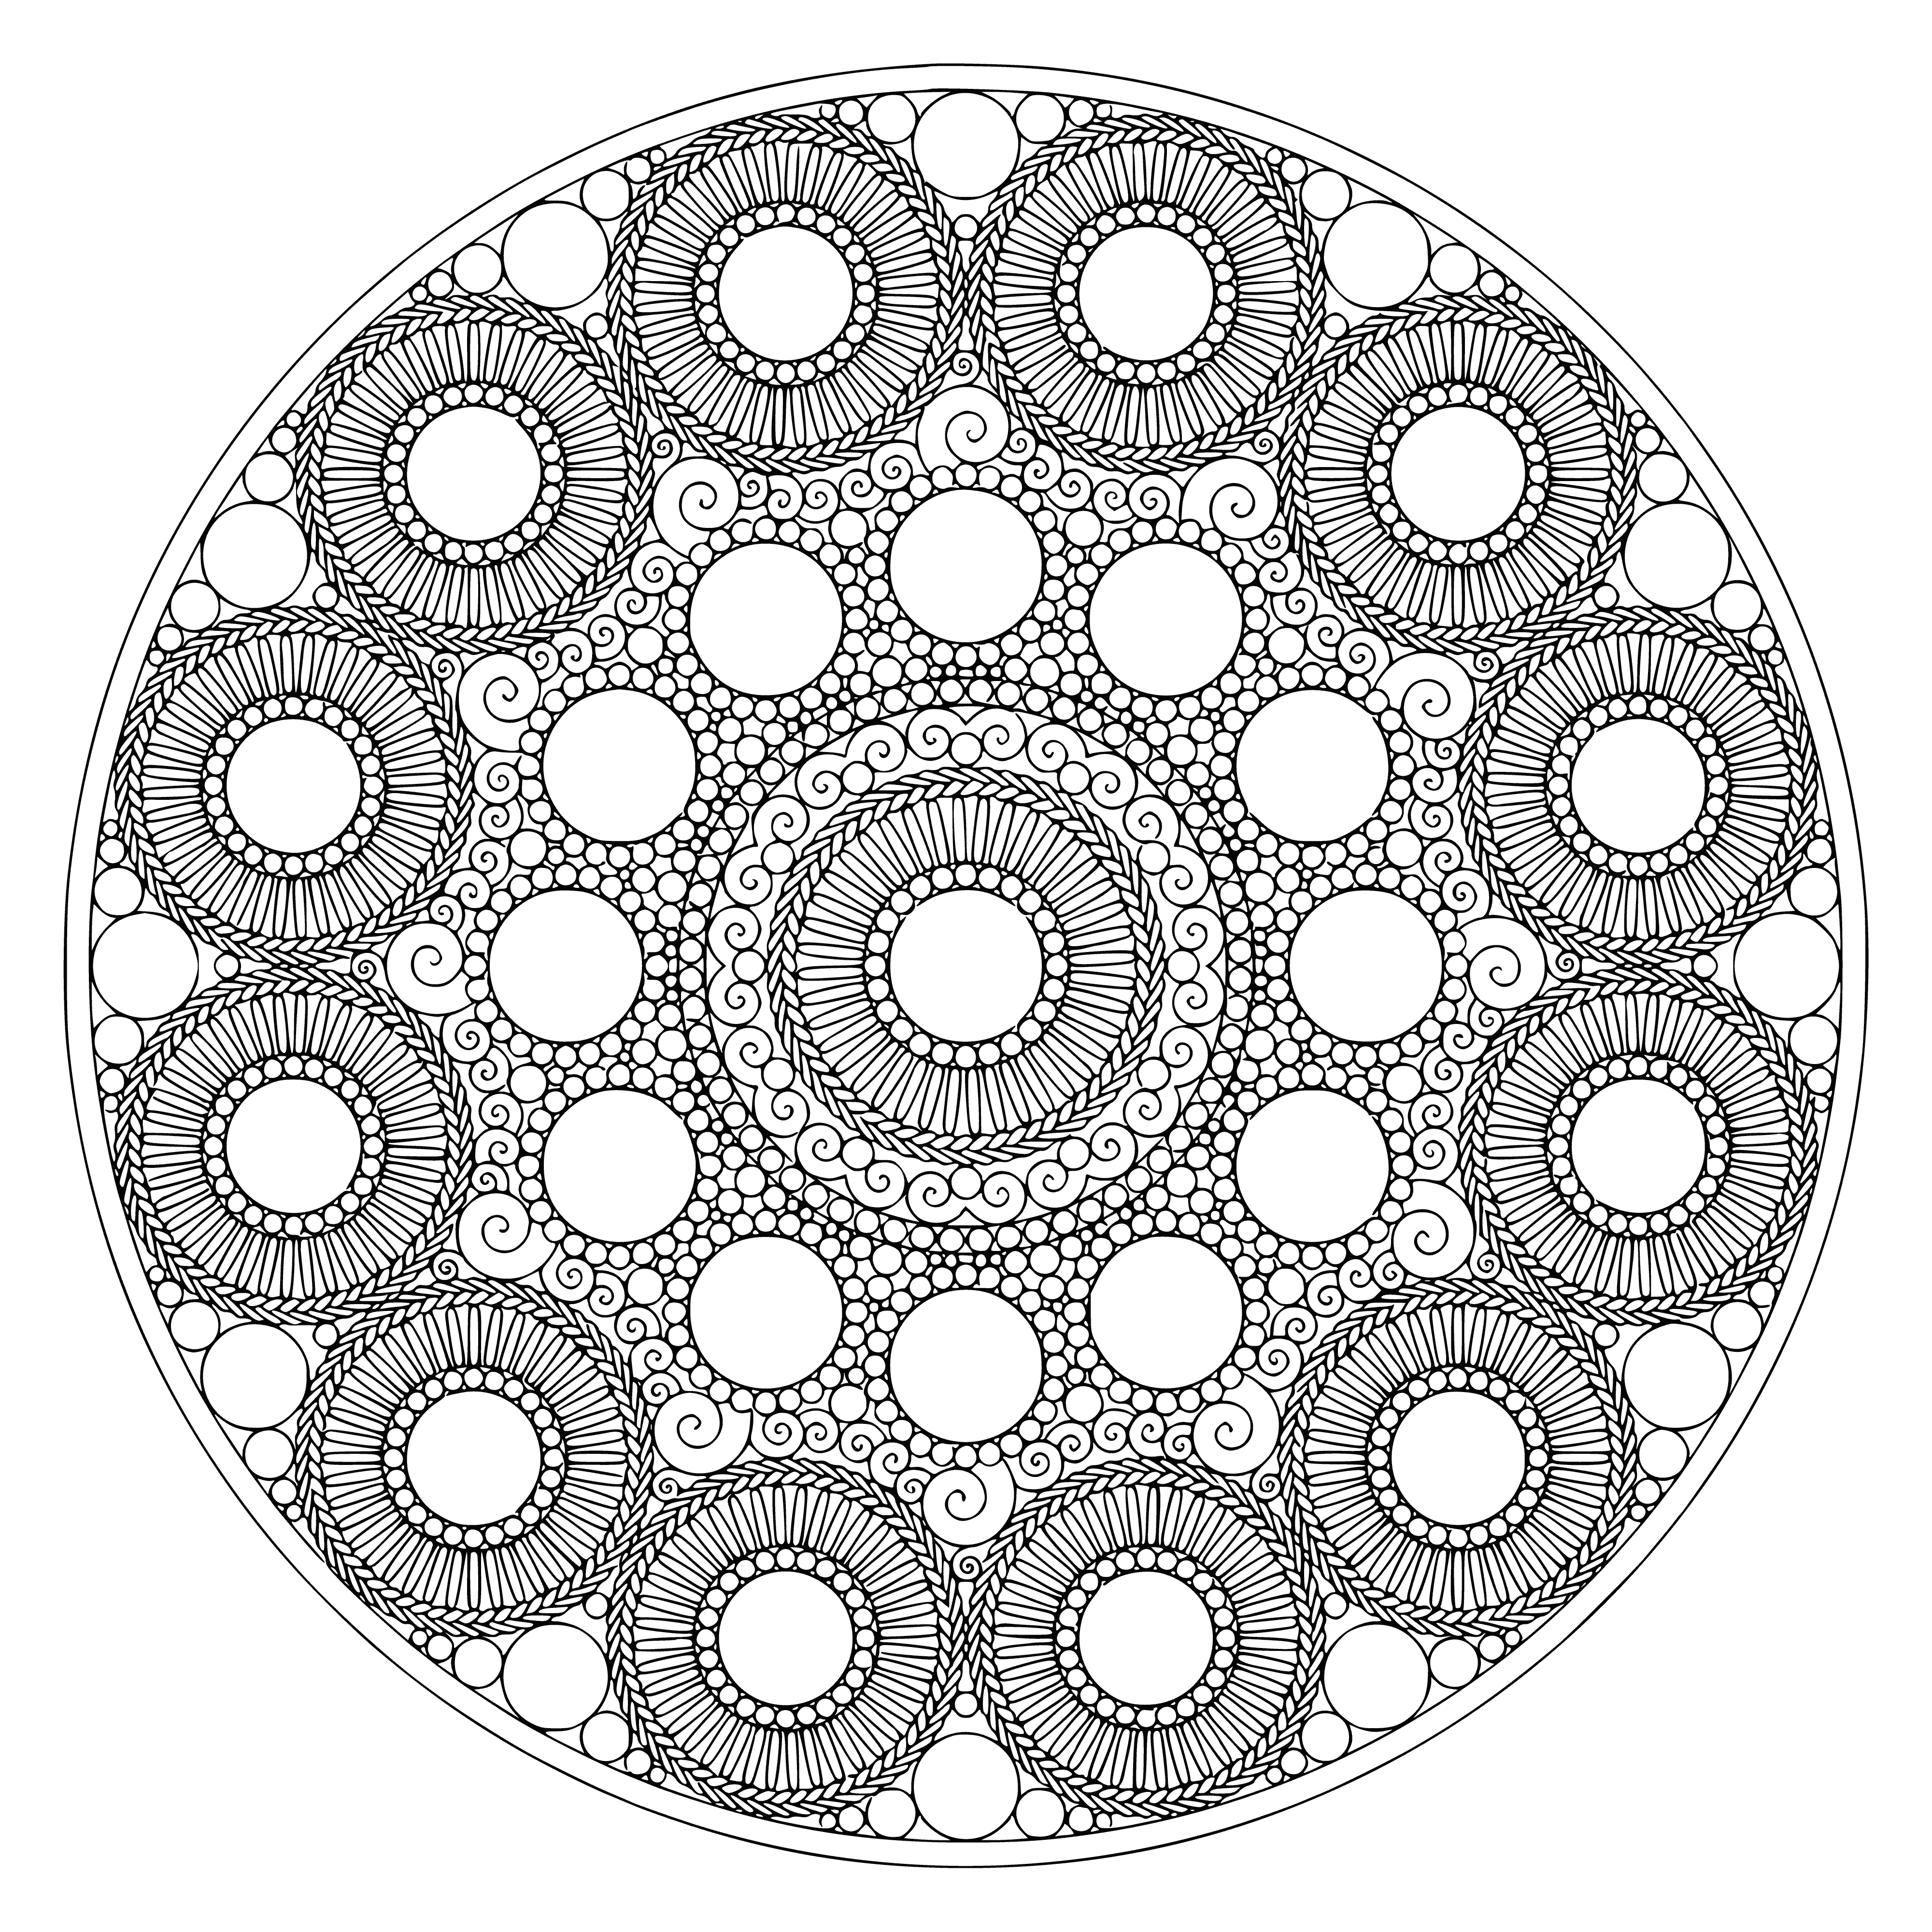 coloring page: Relax and unwind with Mandala's intricate designs and complimentary colors, a beautiful work of art that's perfect for coloring.